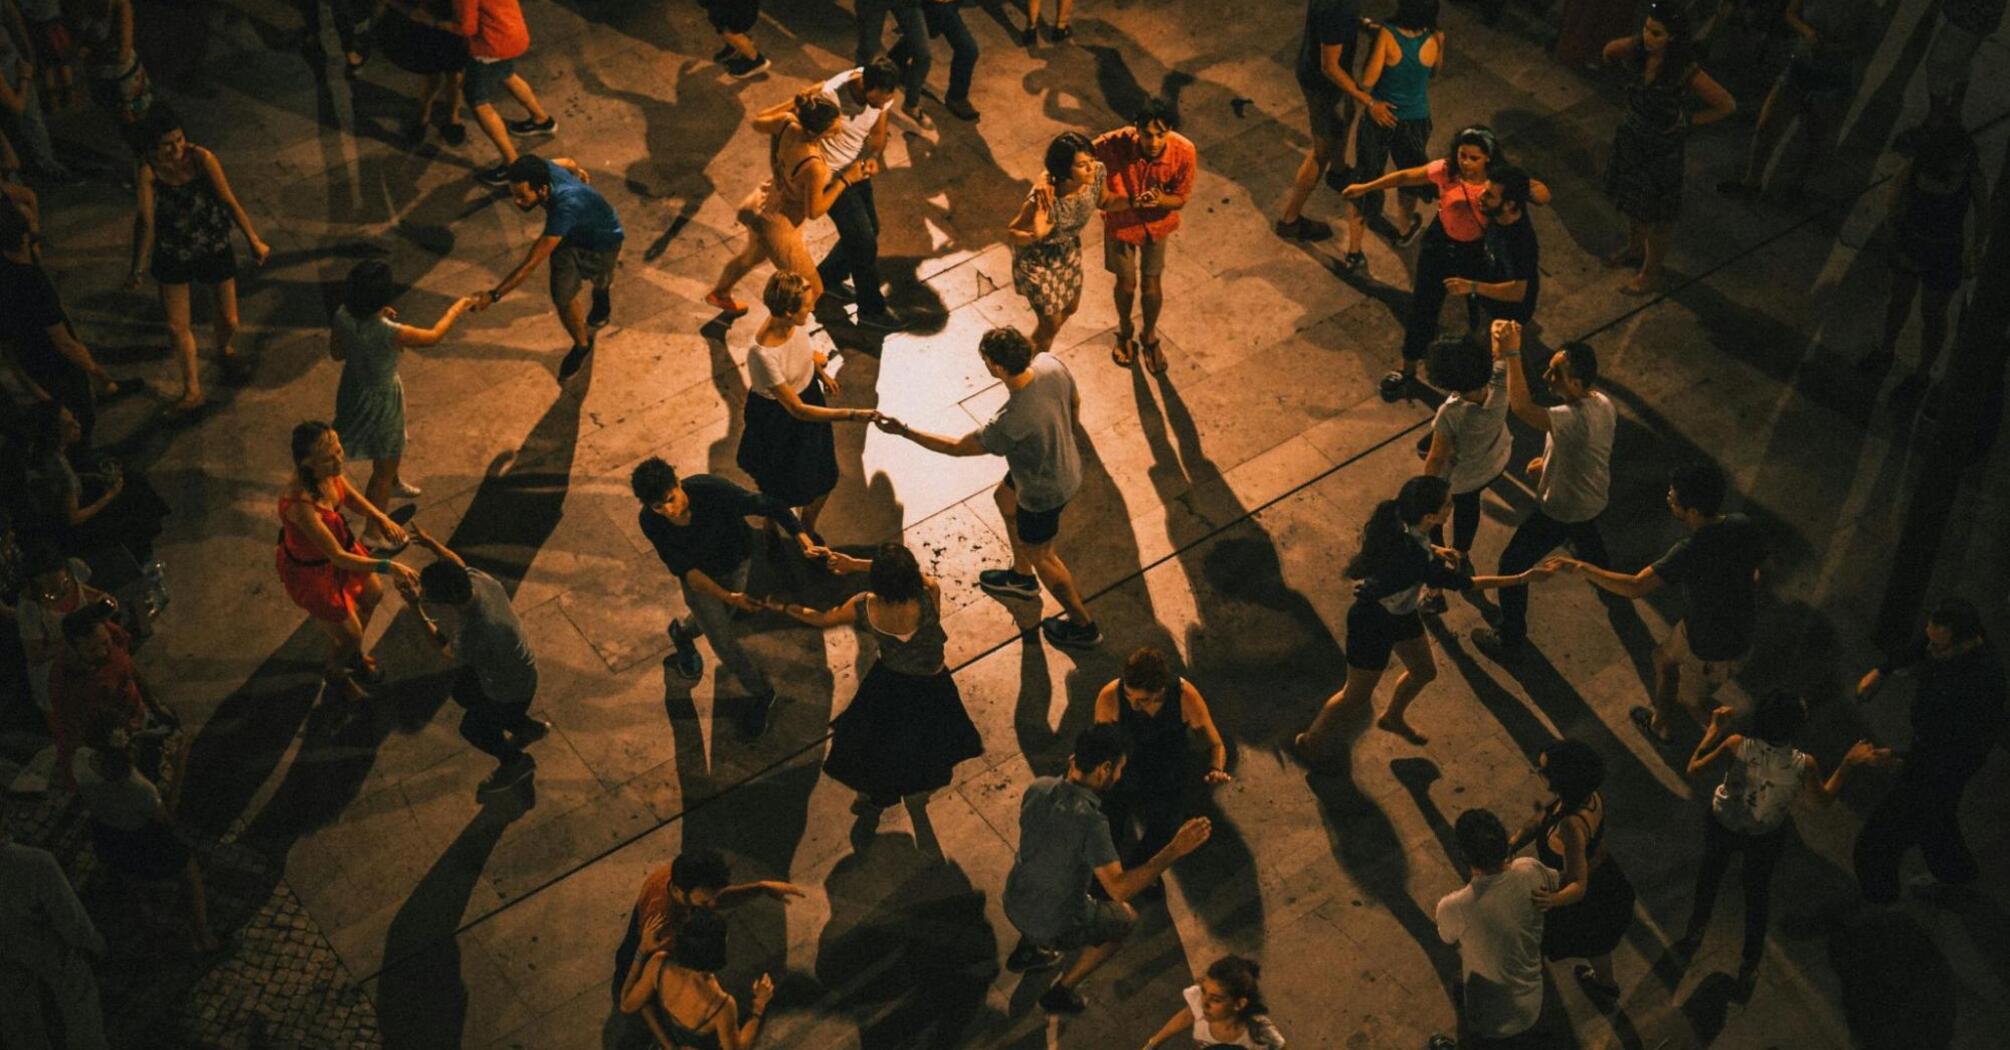 People dancing on the street in the night